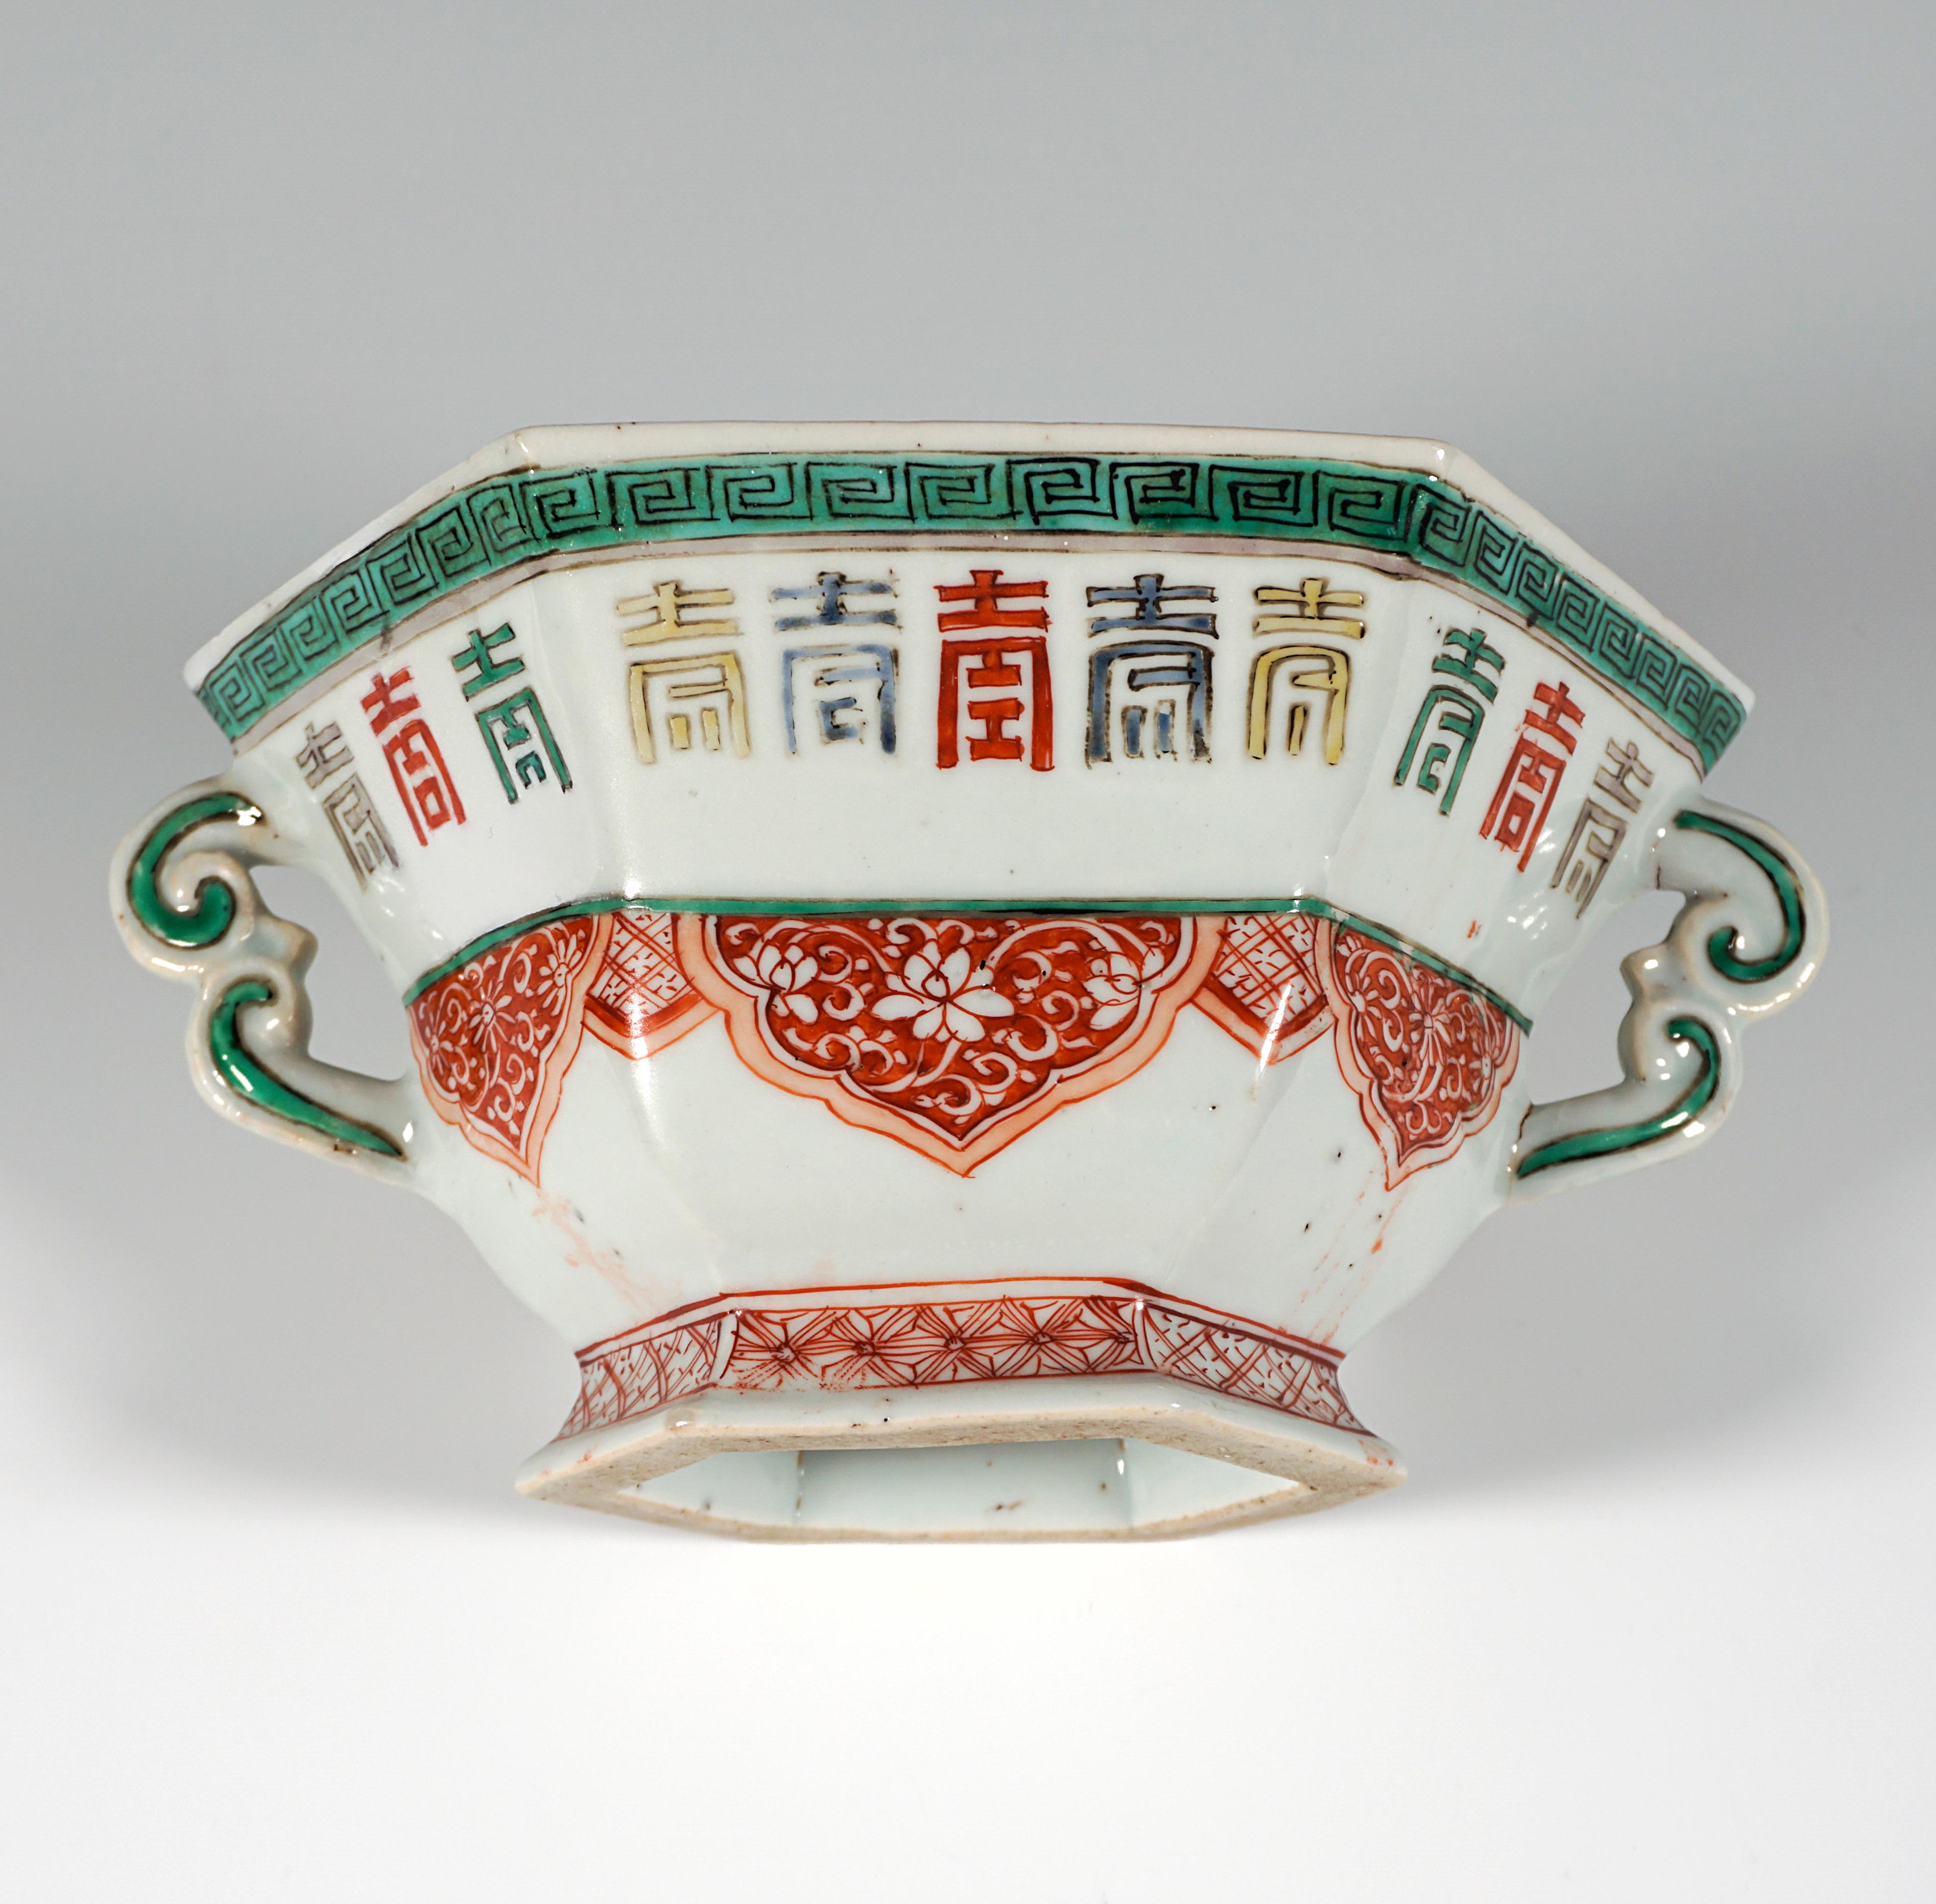 Museal Early Asian Lidded Tureen With Présentoir, Meissen Germany 1740-1780 In Good Condition For Sale In Vienna, AT